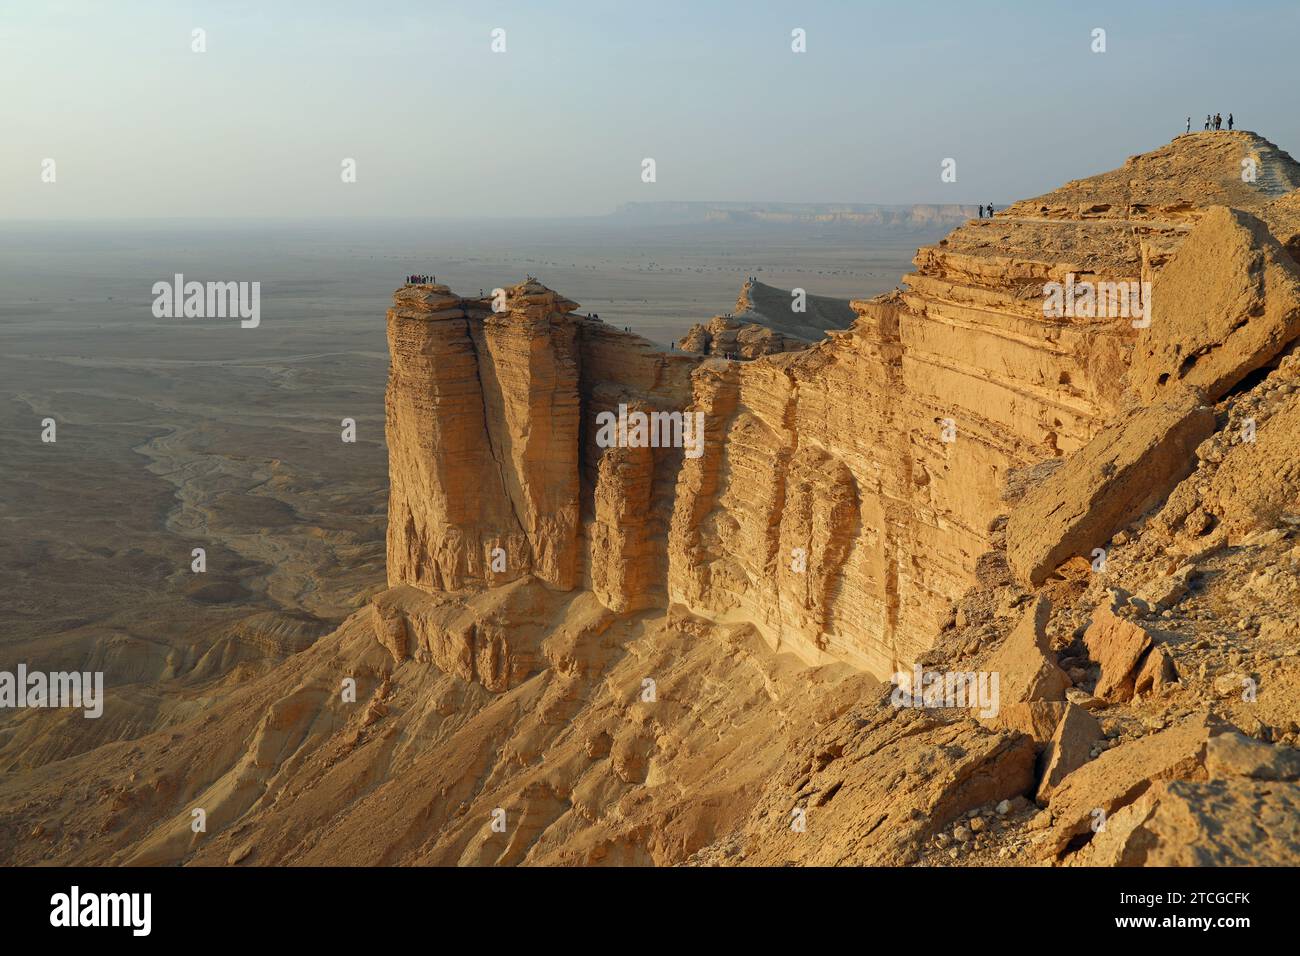 Tourists at the famous Edge of the World viewpoint in Saudi Arabia Stock Photo